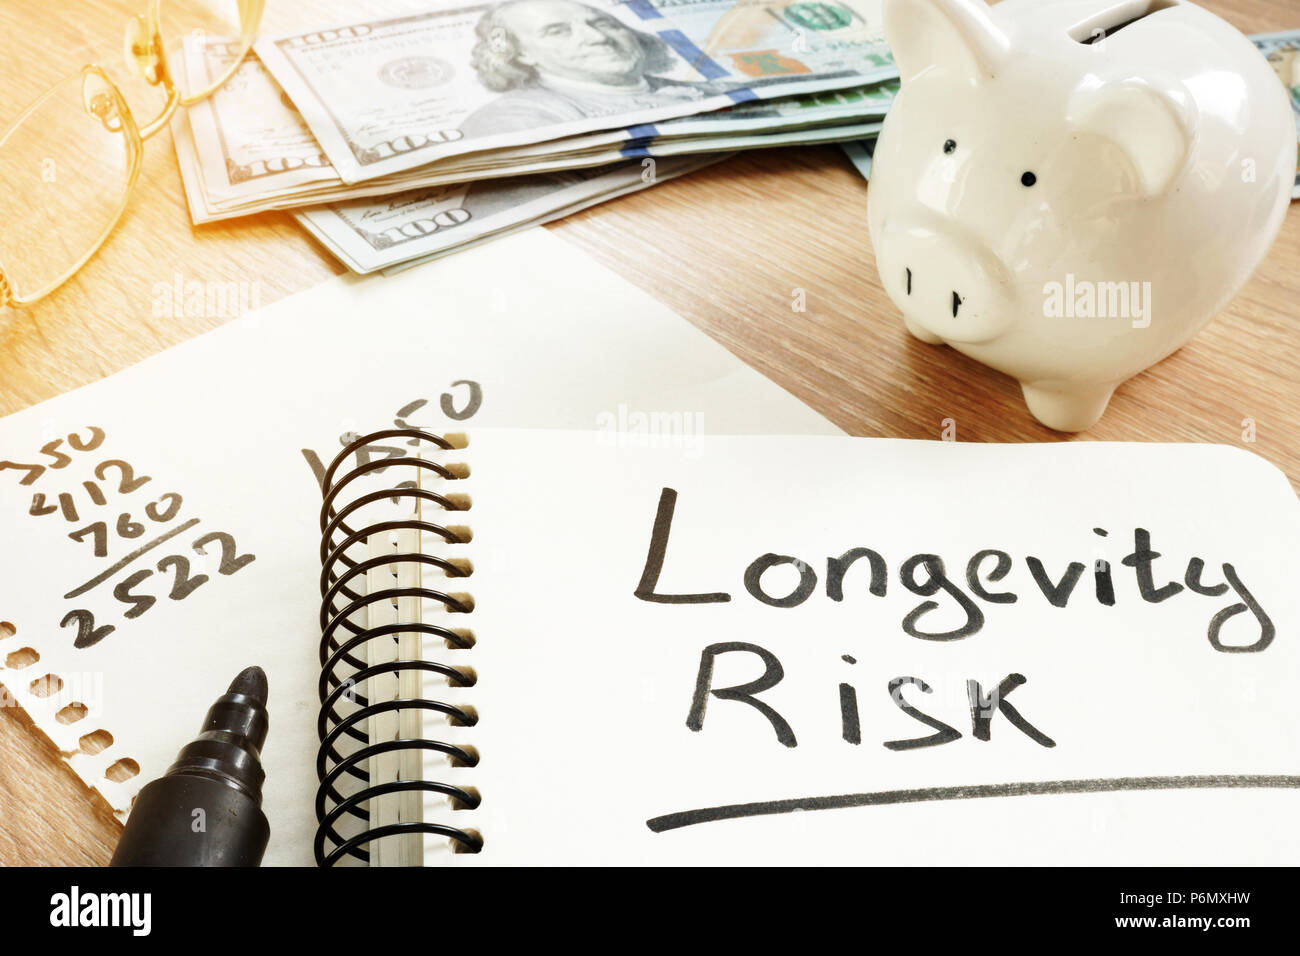 Longevity risk handwritten on a note. Pension concept. Stock Photo